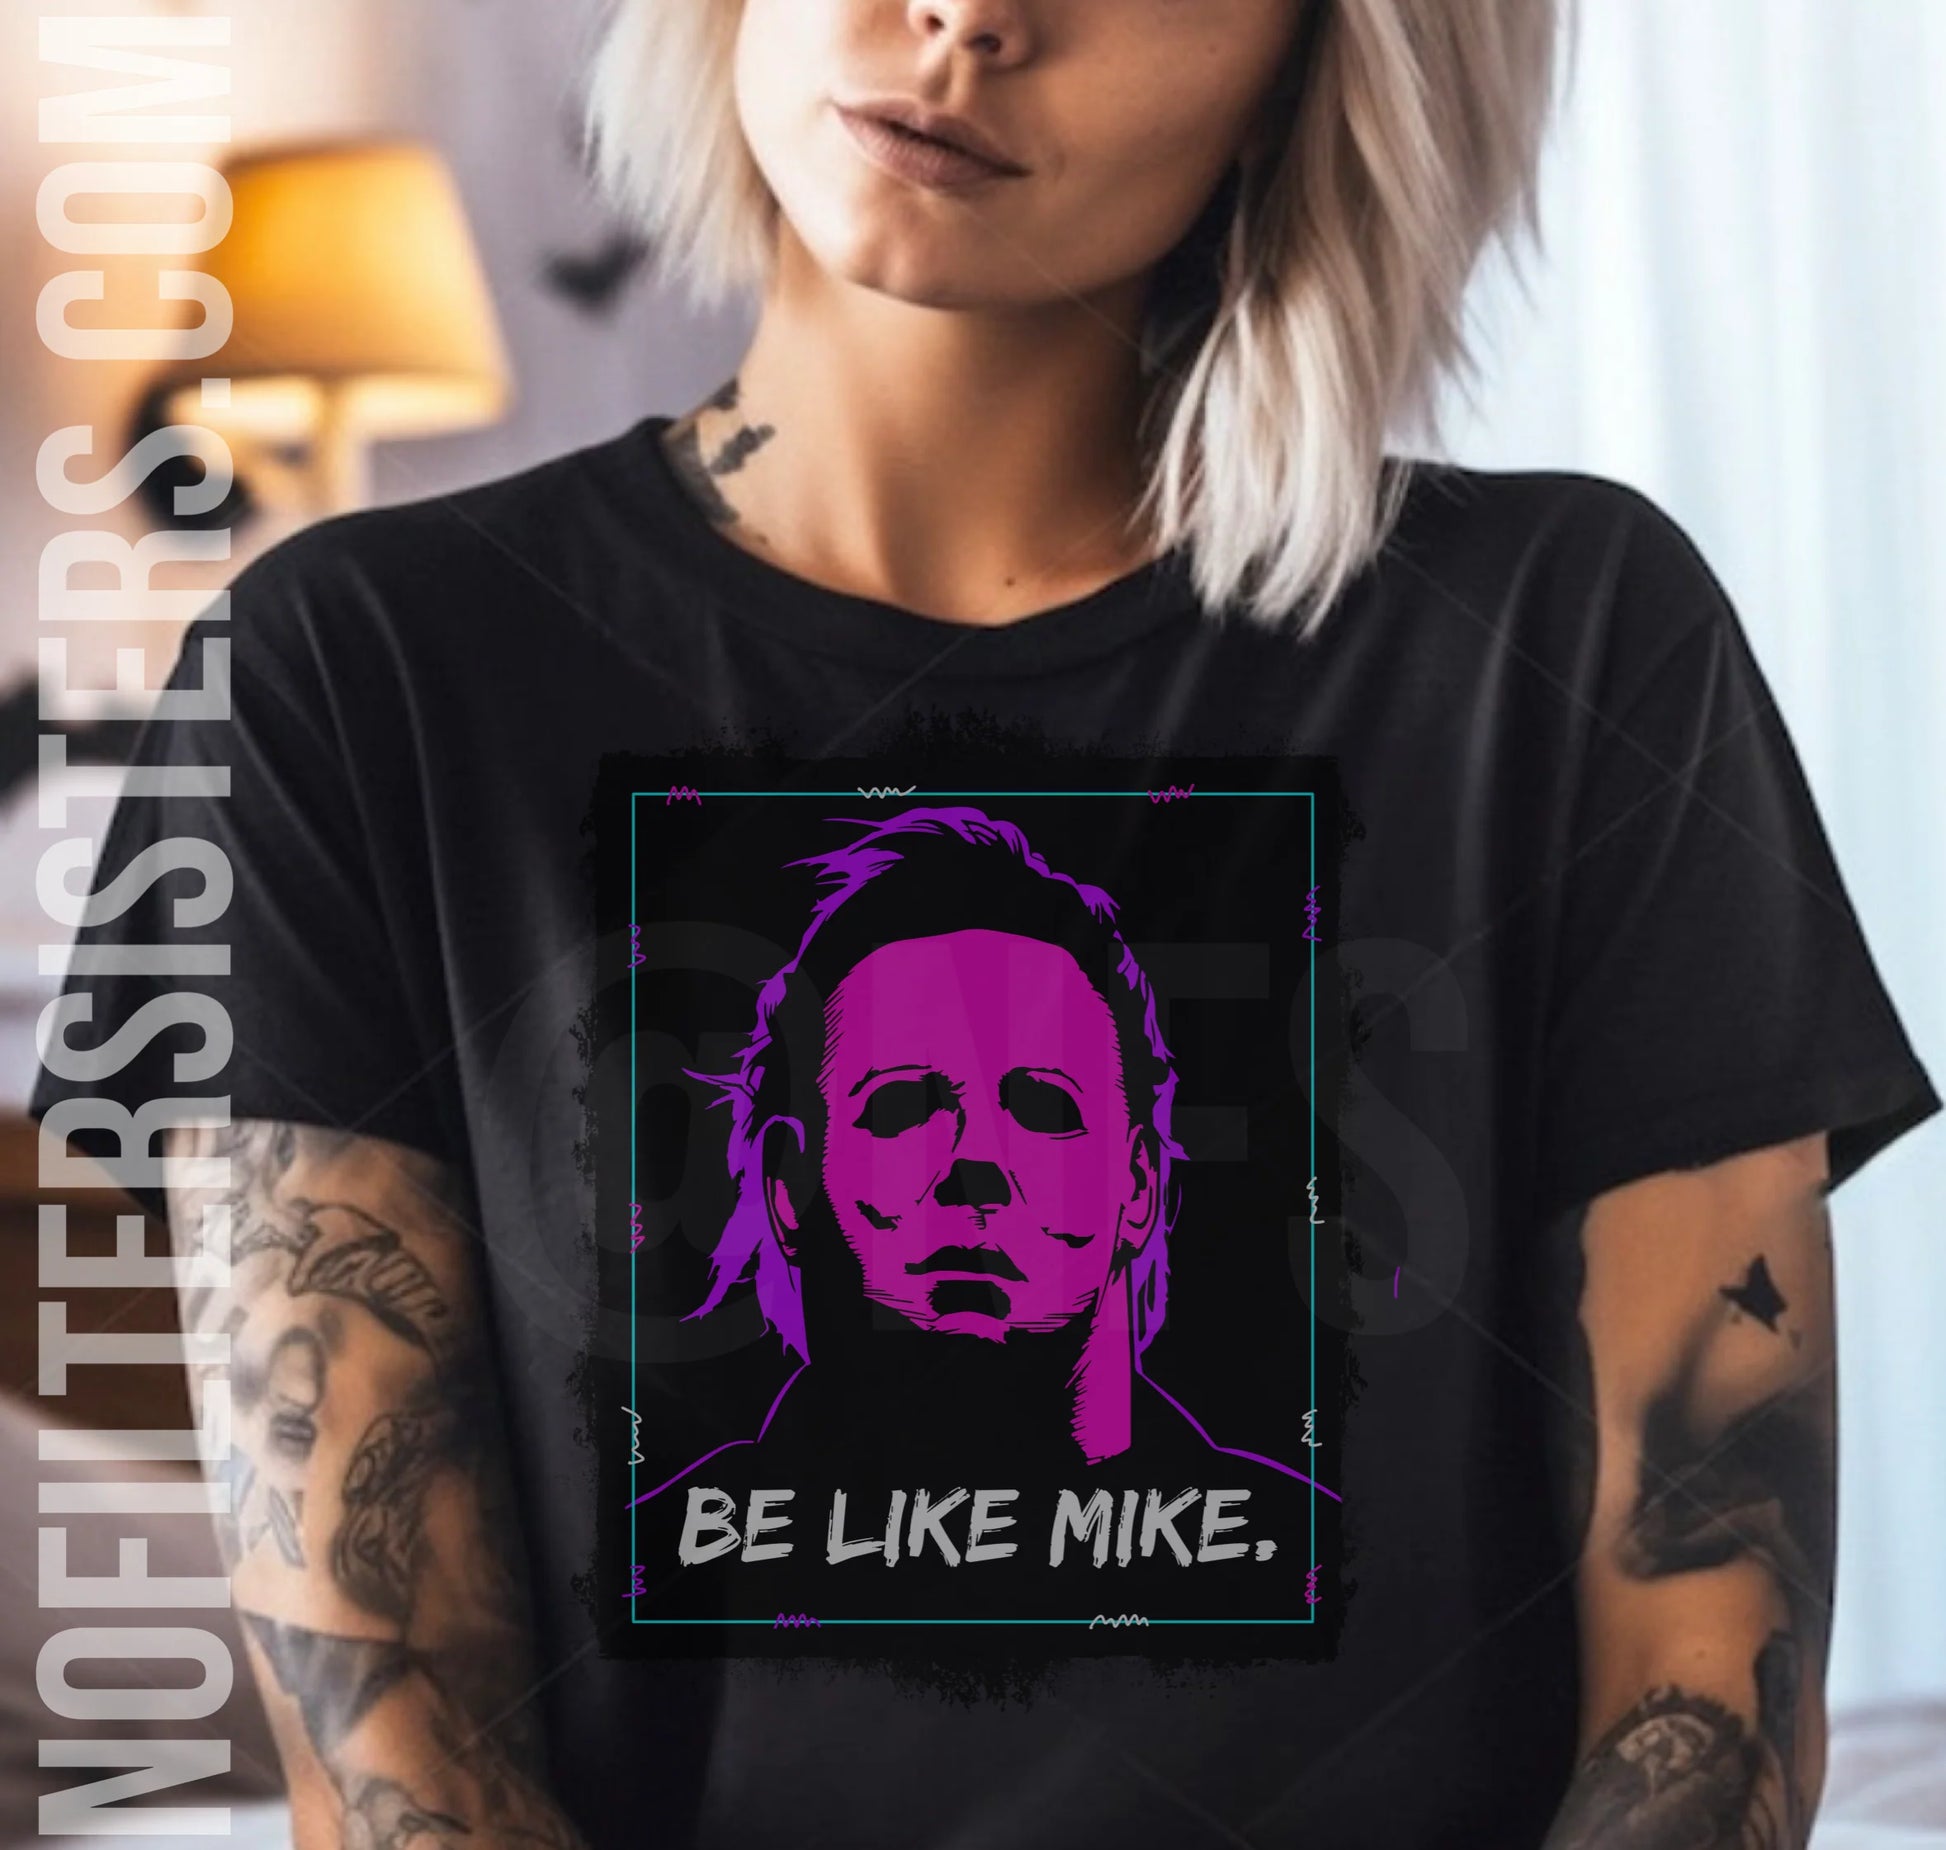 Step up your style game with our 'Be Like Mike Tee.' This graphic tee is a nod to the iconic 'Be Like Mike' slogan. Sport your admiration for greatness with this comfortable unisex tee, designed for a true-to-size fit. Perfect for all fans of the legend himself. Elevate your wardrobe today!